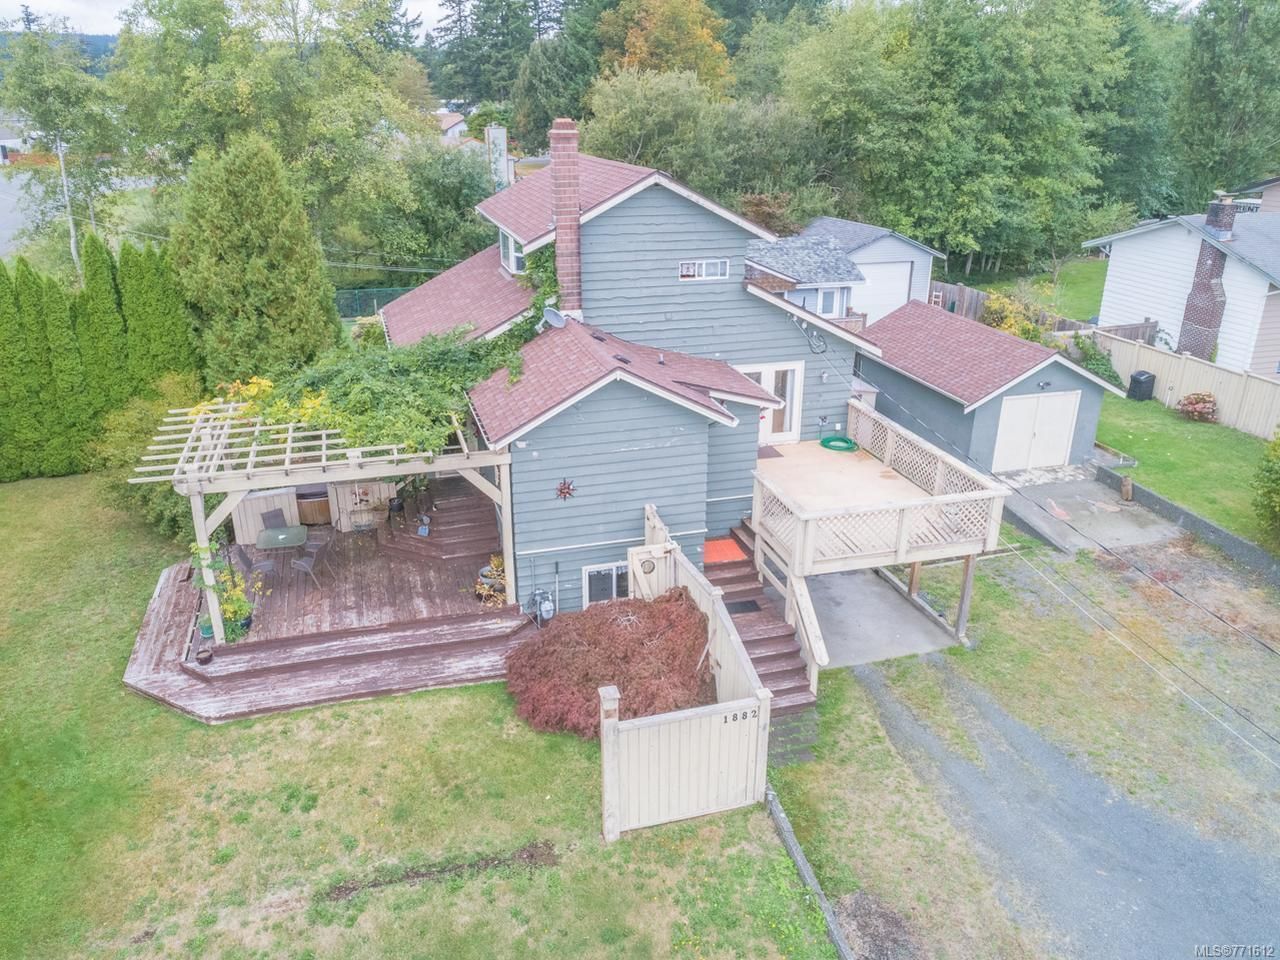 Main Photo: 1882 GARFIELD ROAD in CAMPBELL RIVER: CR Campbell River North House for sale (Campbell River)  : MLS®# 771612